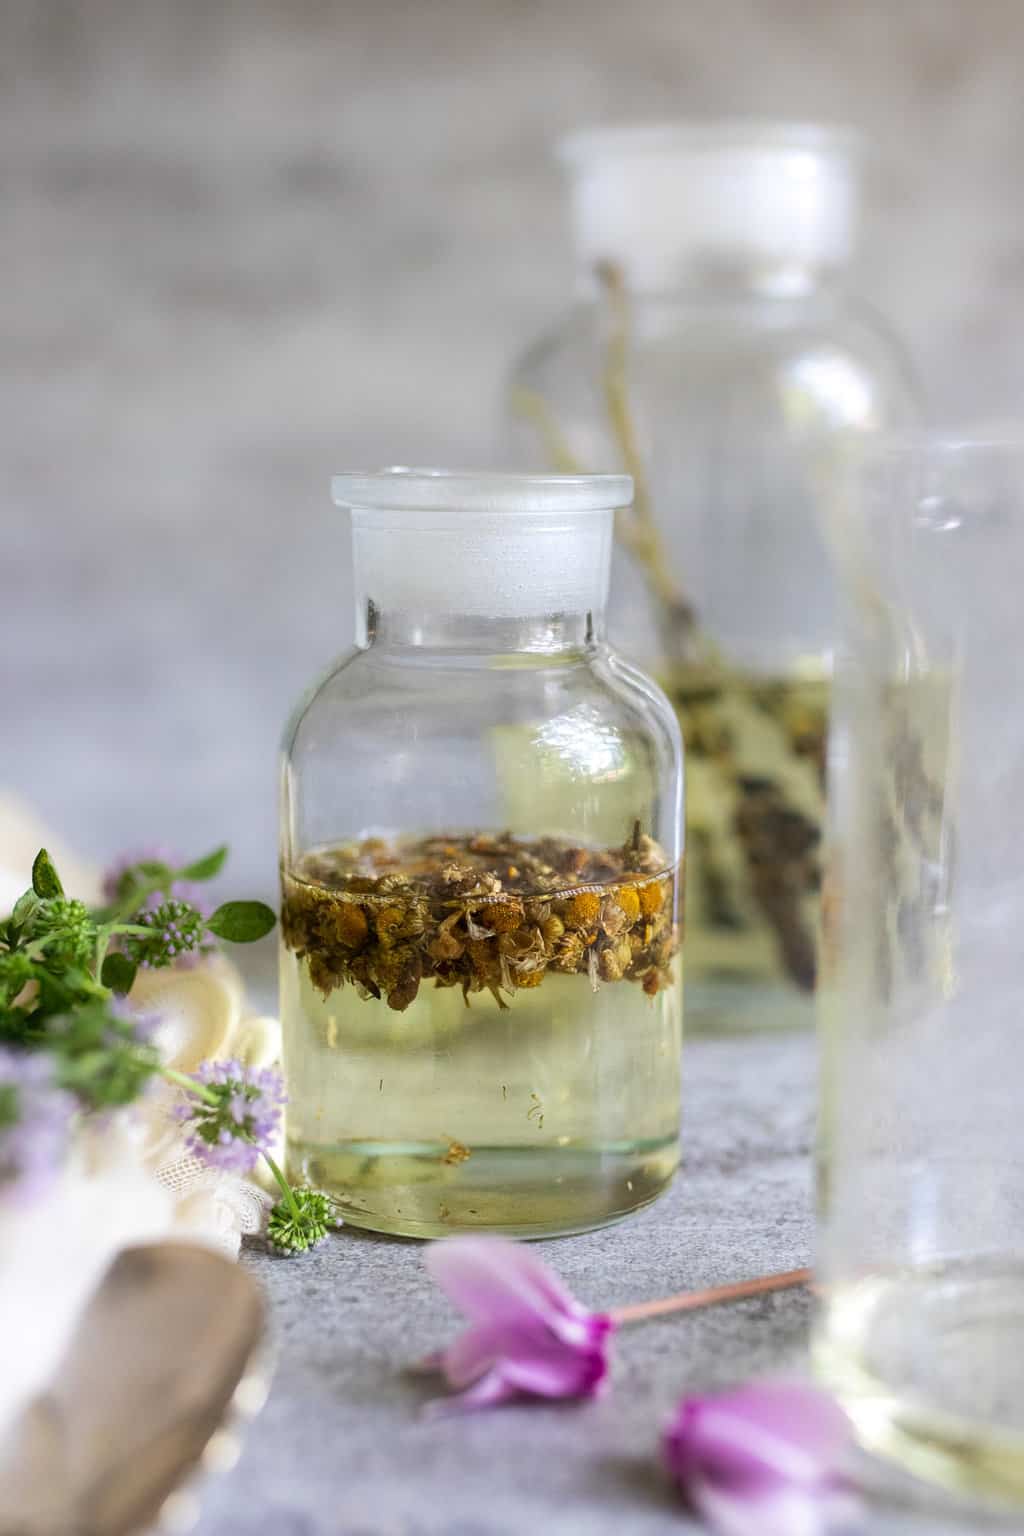 how to make herbal oils